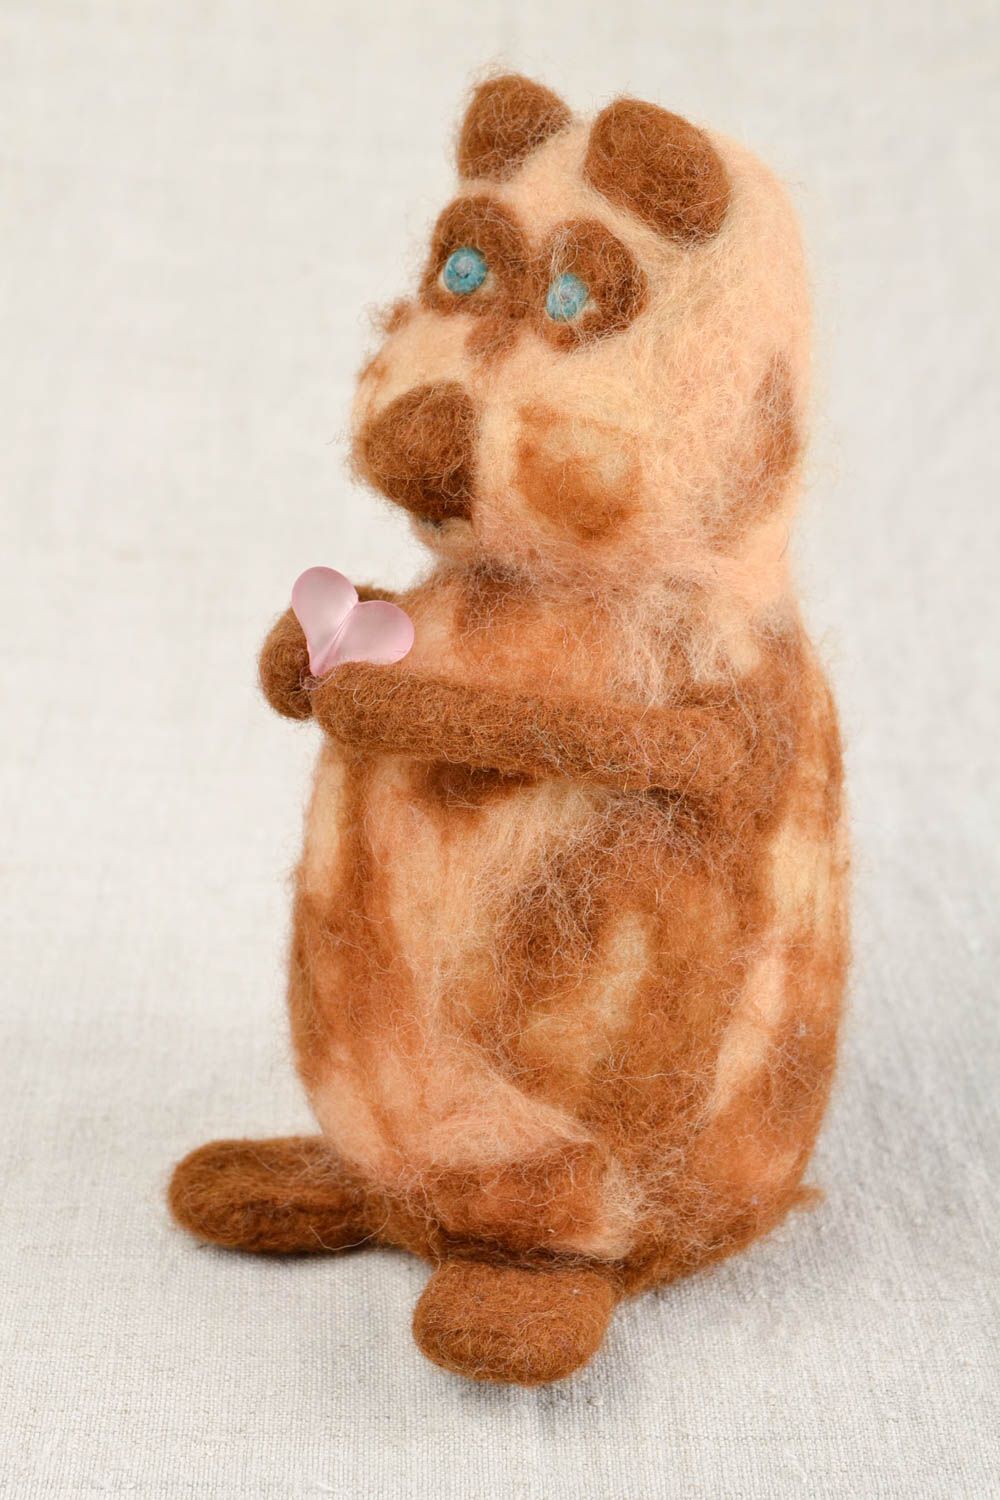 Handcrafted toy felt toy animal toy animal figurine for home decoration photo 1